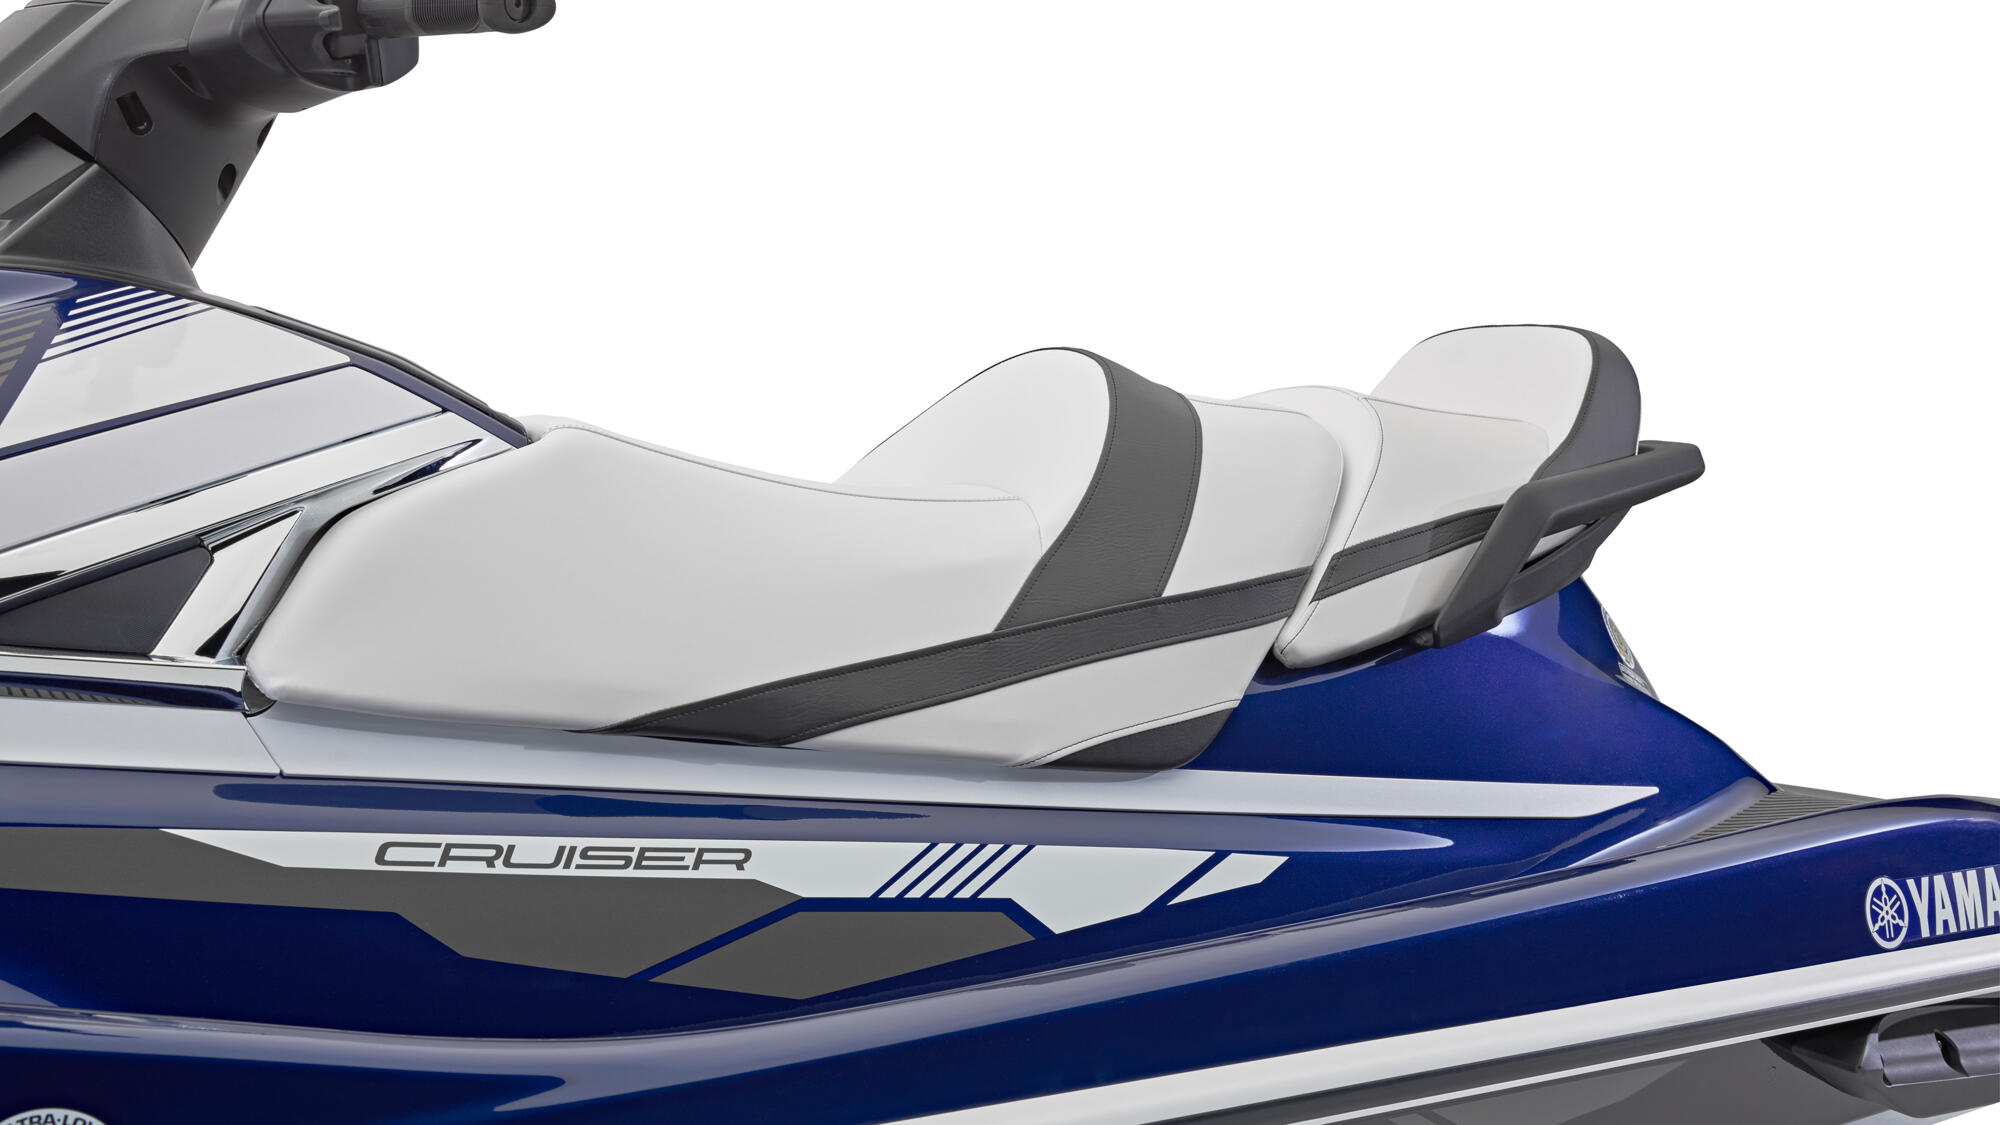 Yamaha Vx Cruiser Features And Technical Specifications